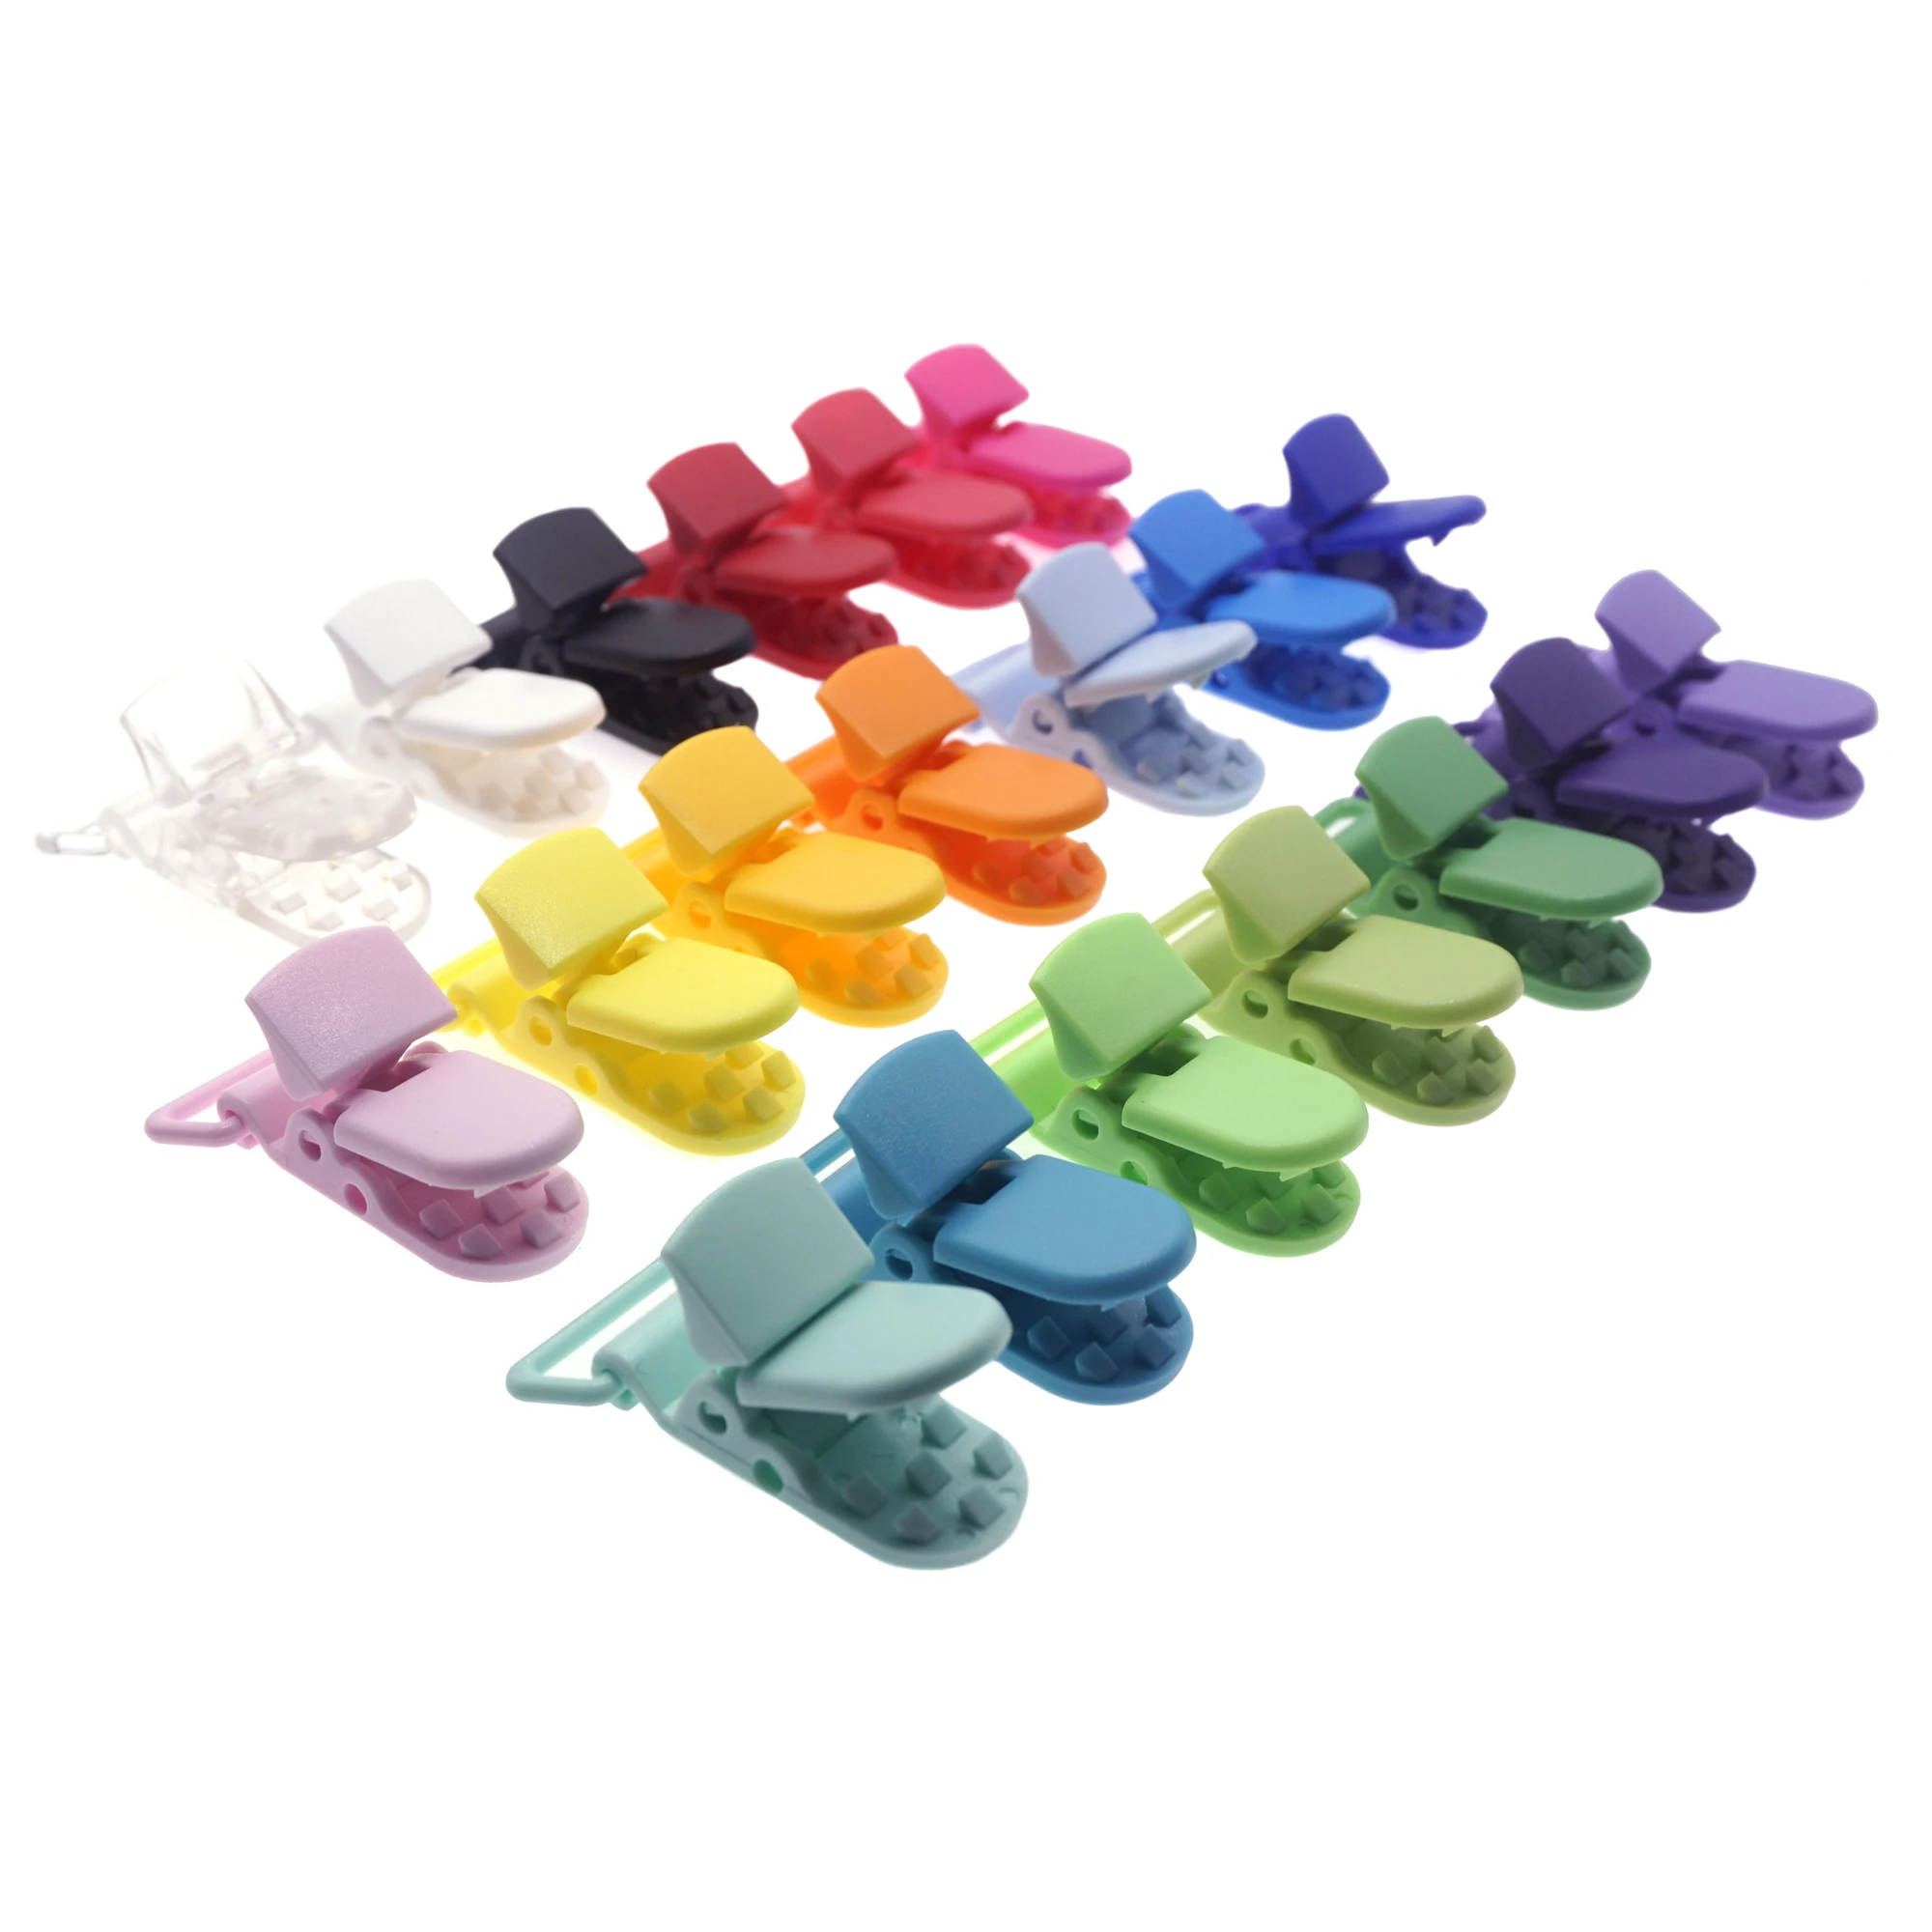 Free Shipping 250pcs 15 Colors Eco-friendly KAM Plastic Pacifier Clips Holder Soother Baby Bib Dummy Clip Chain For 20MM Ribbon